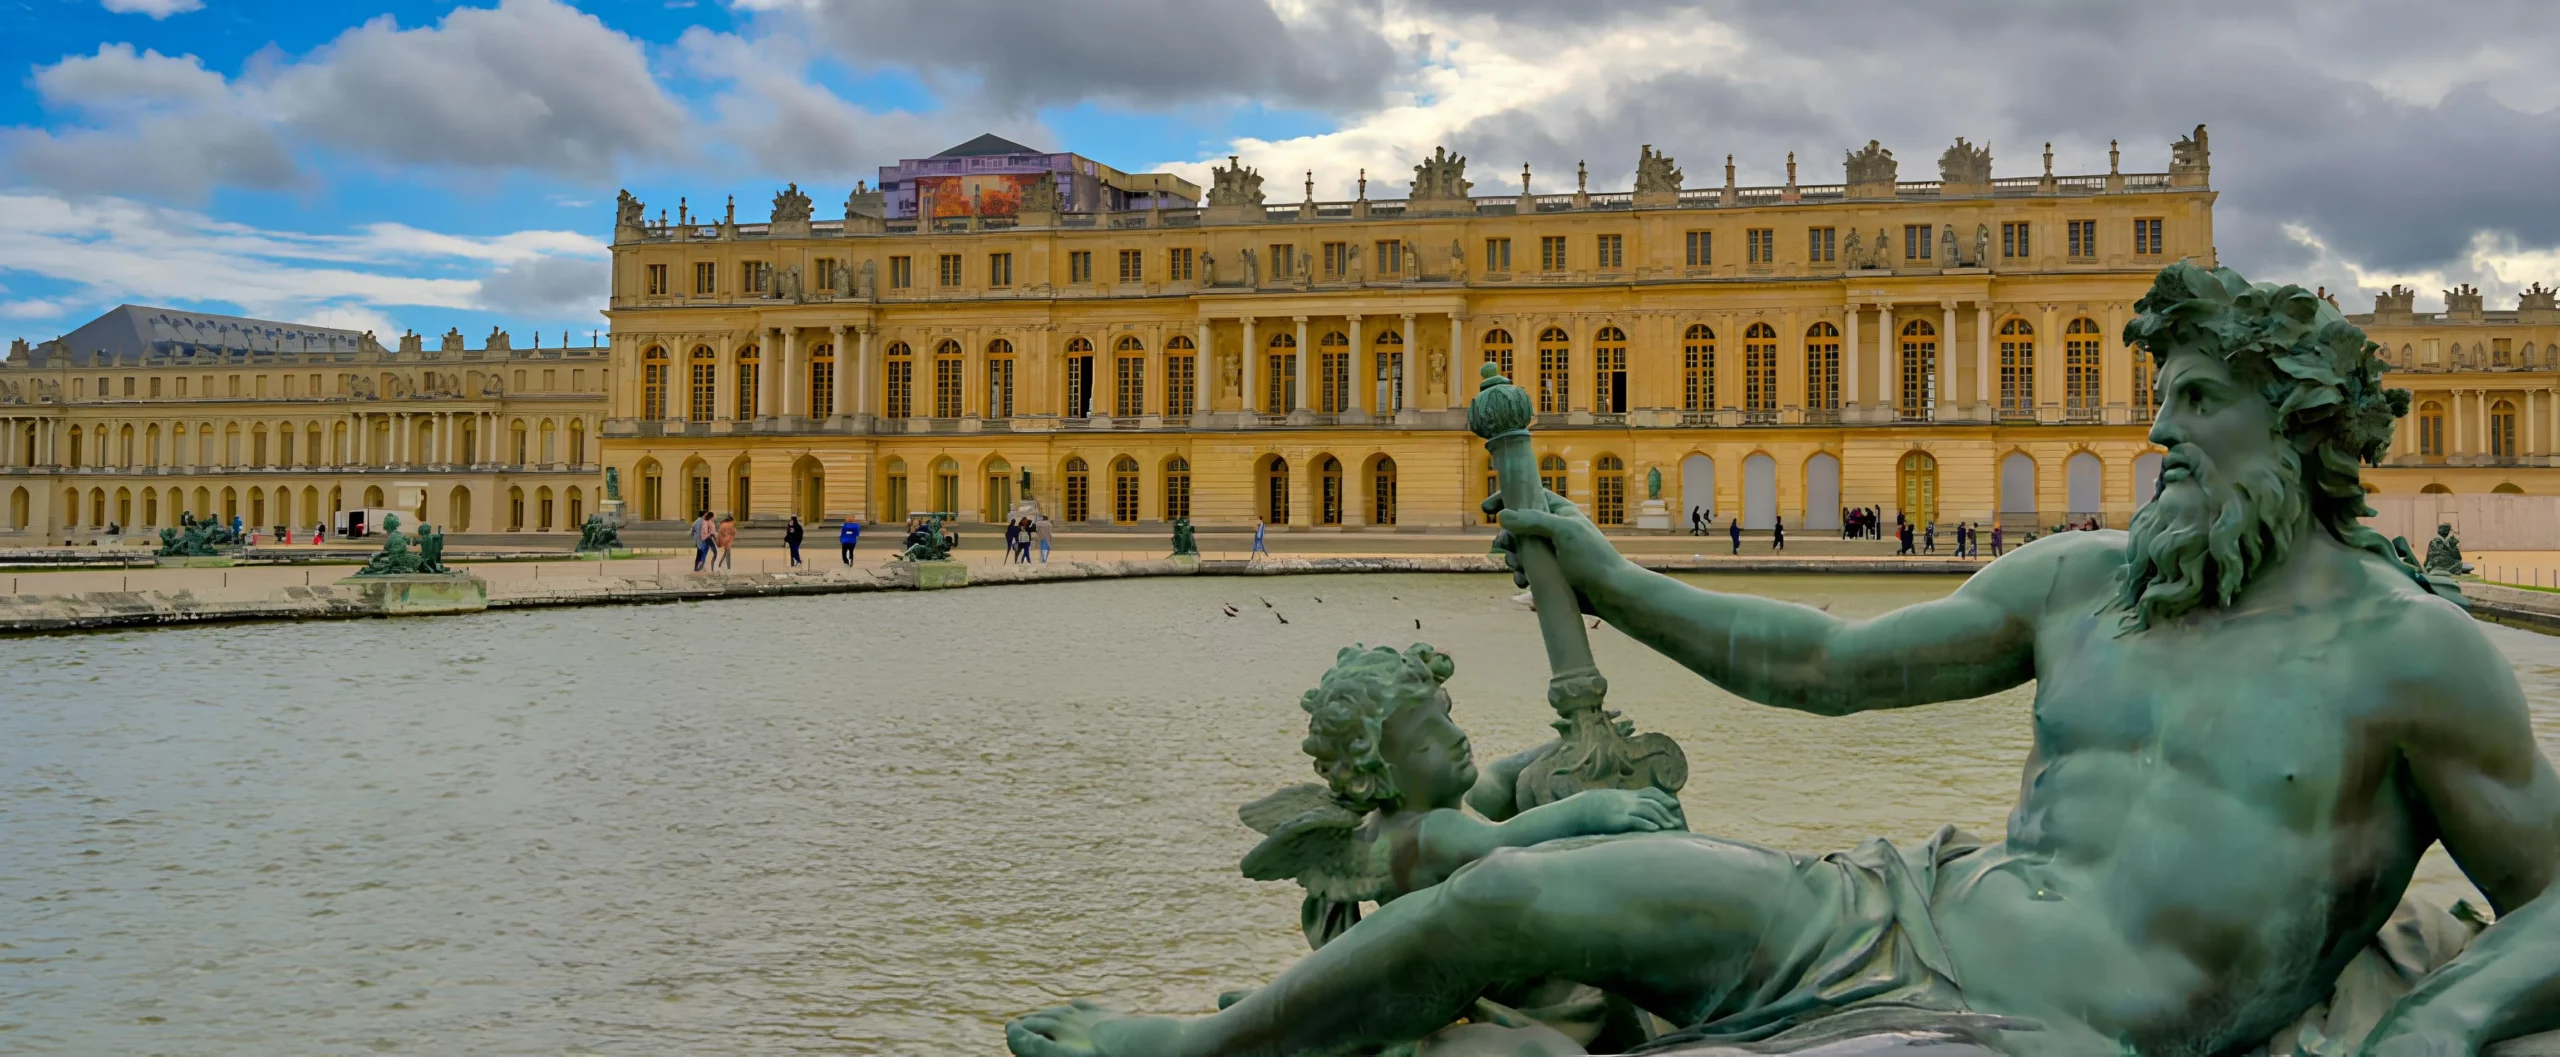 Step Back in Time at the Palace of Versailles 